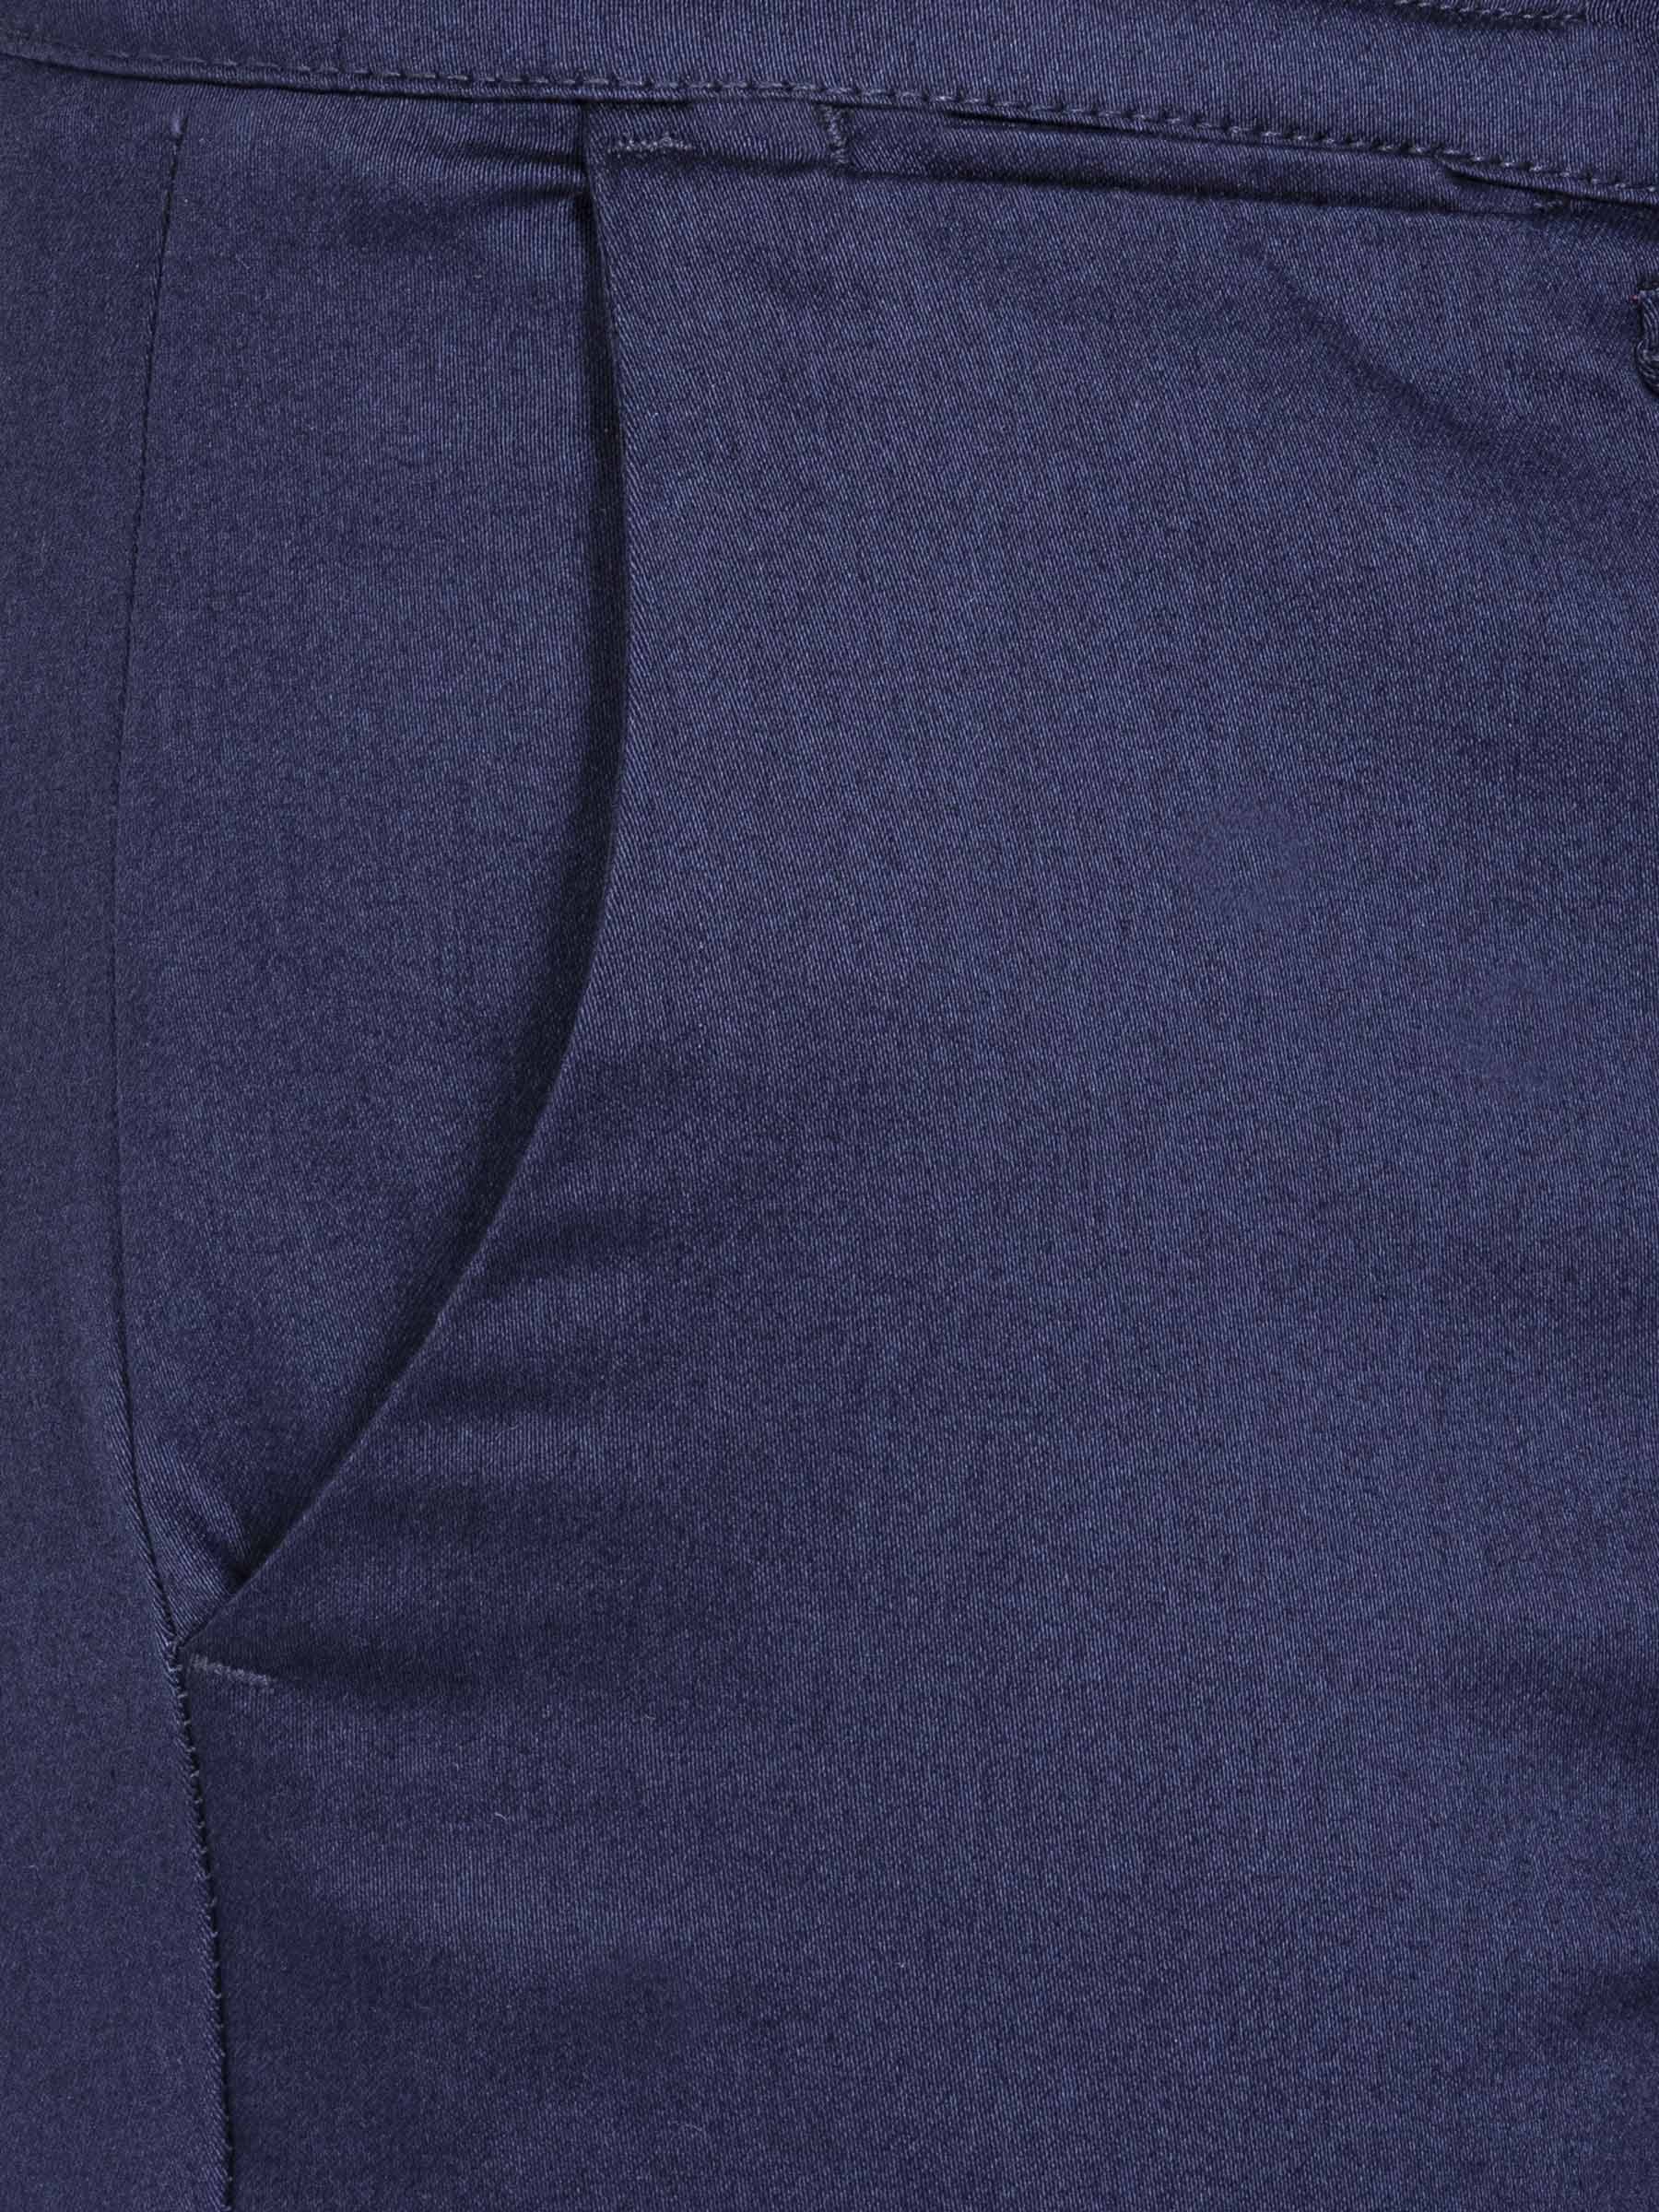 Moyale Stretch Washed Navy Chino 